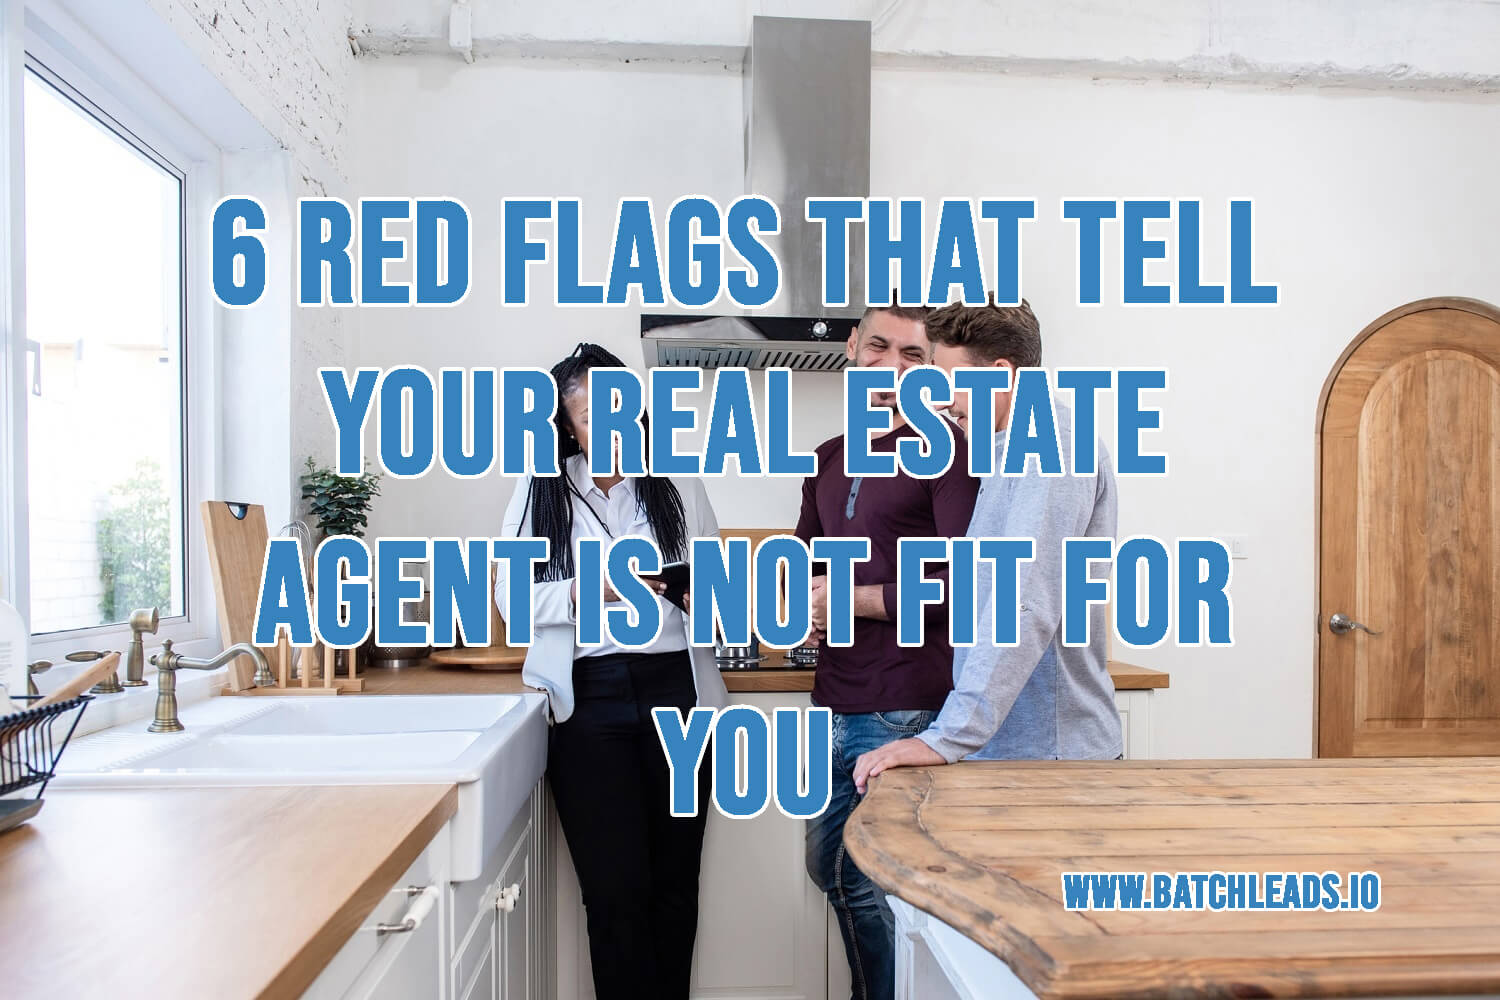 6 Red Flags That Tell Your Real Estate Agent Is Not Fit For You